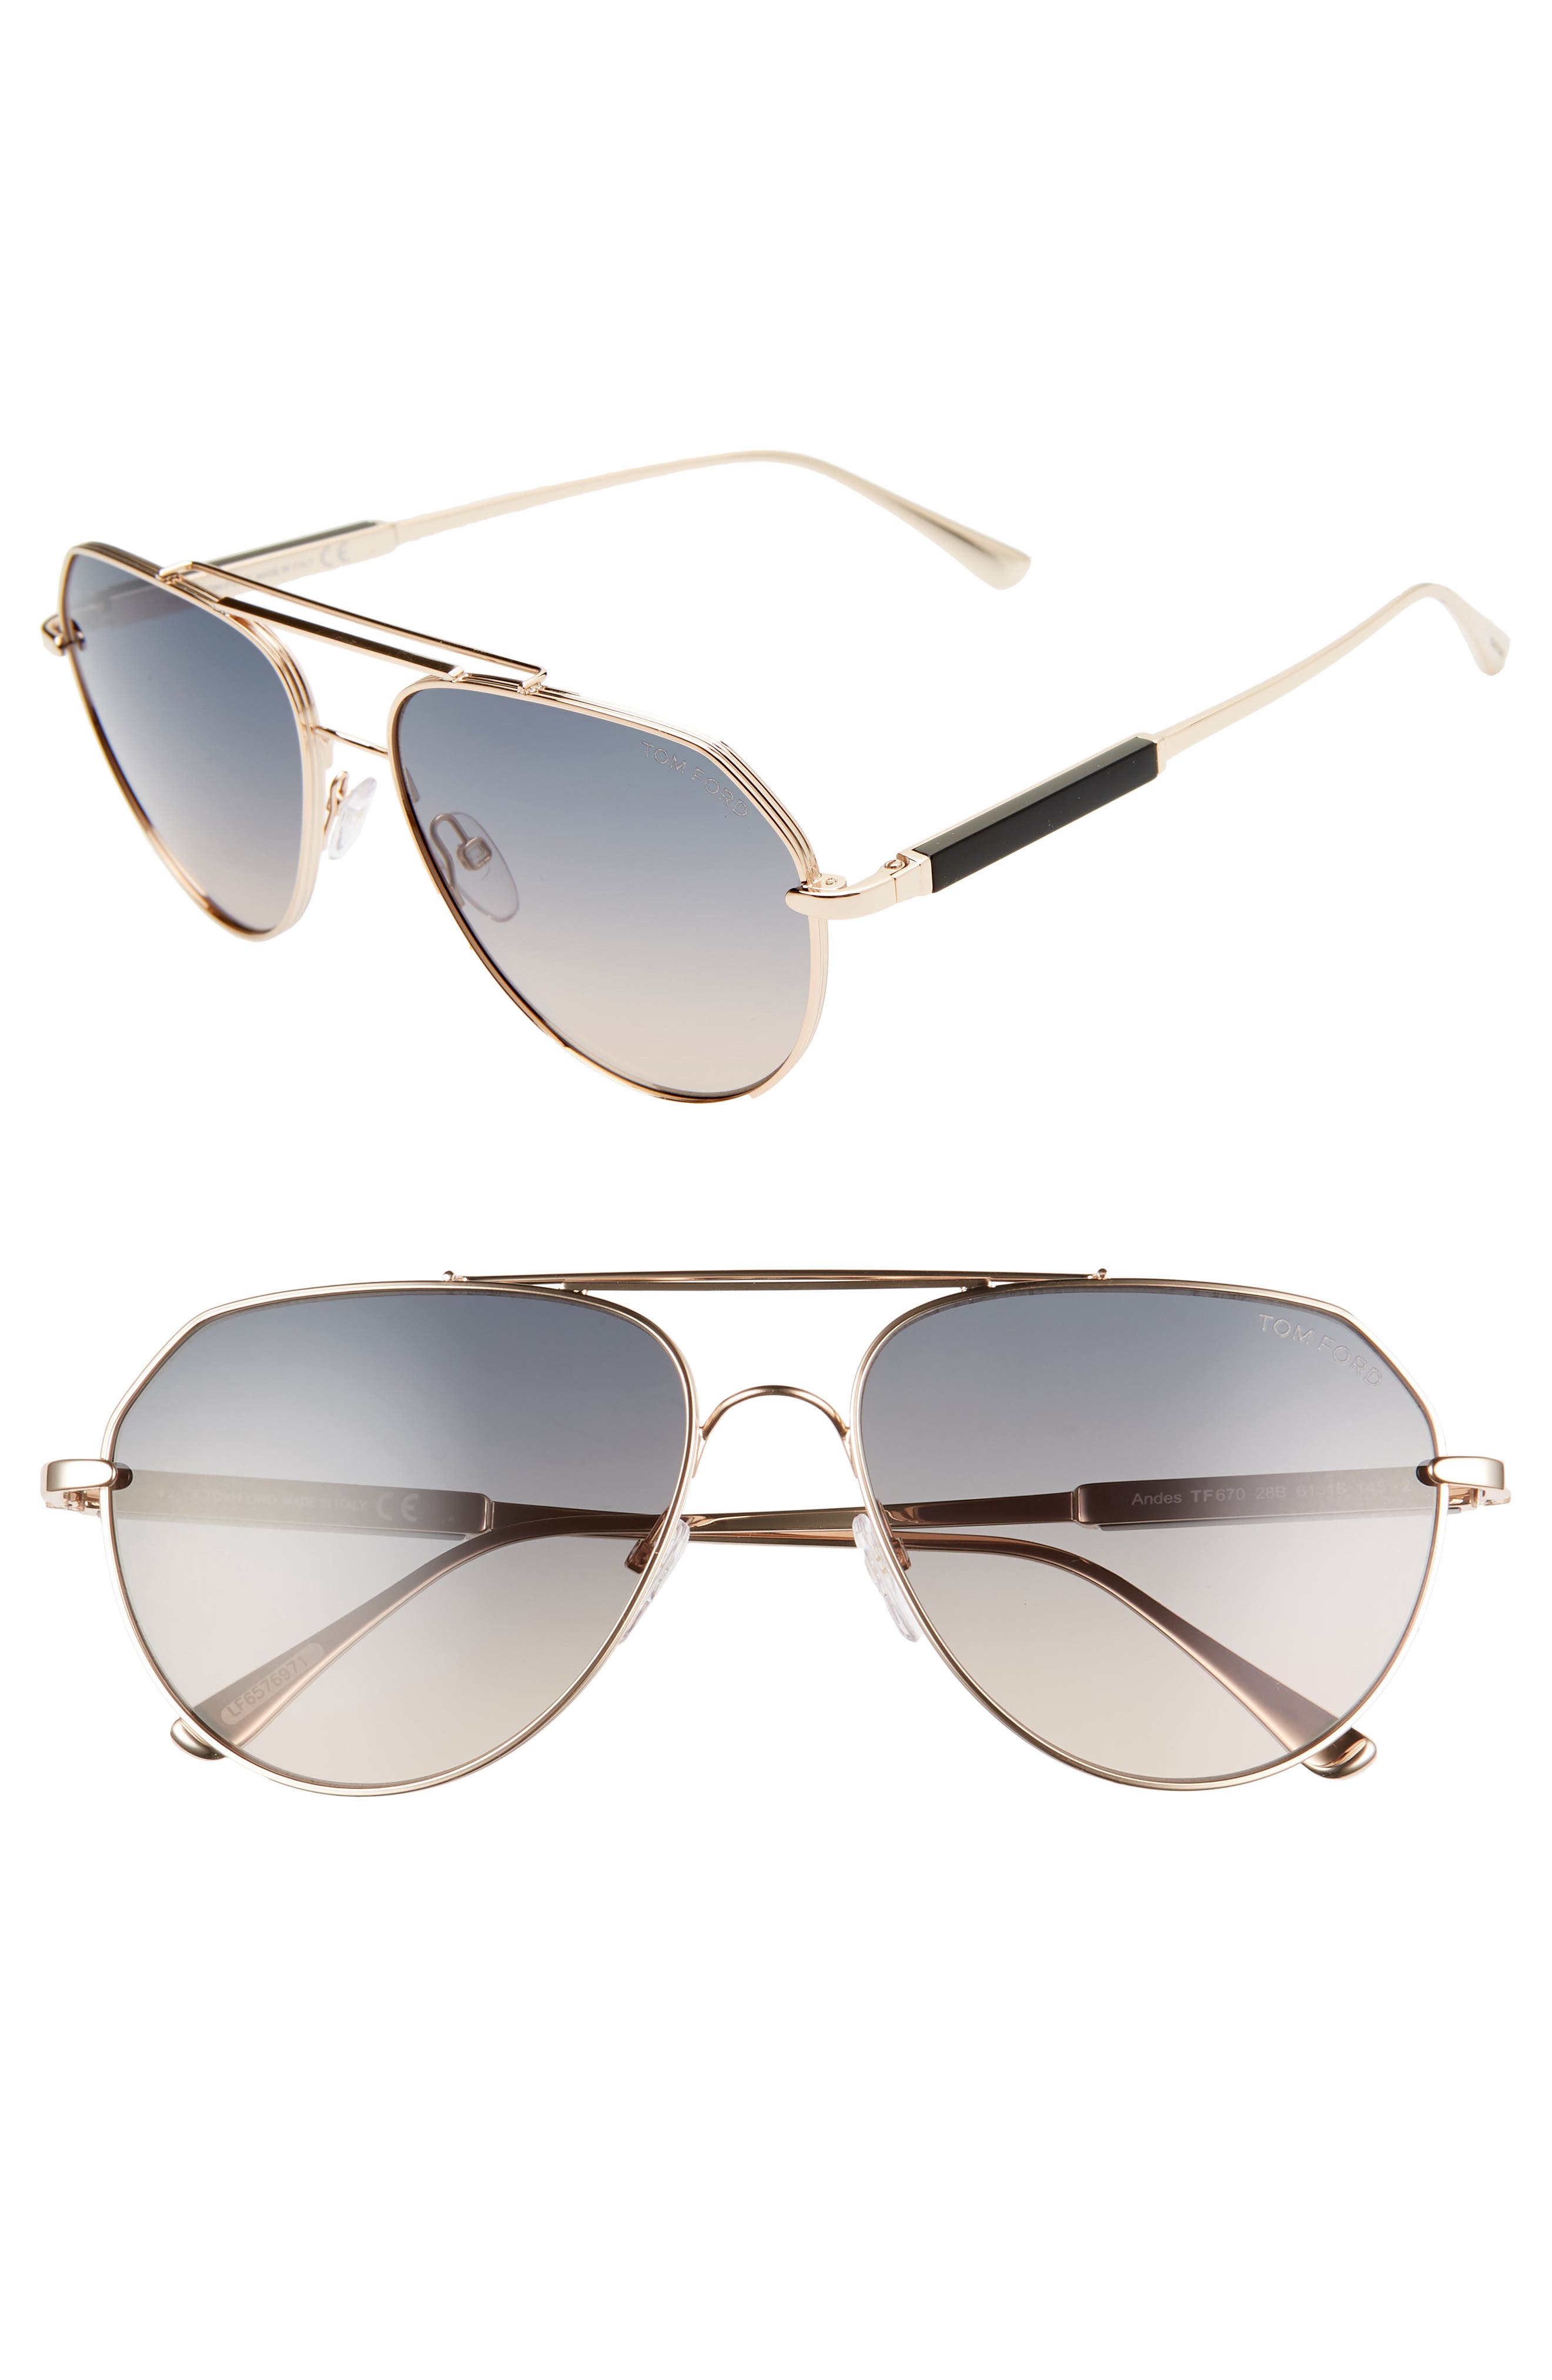 Tom Ford Andes 61mm Aviator Sunglasses In Rose Gold/ Black/grey To Ochre |  ModeSens